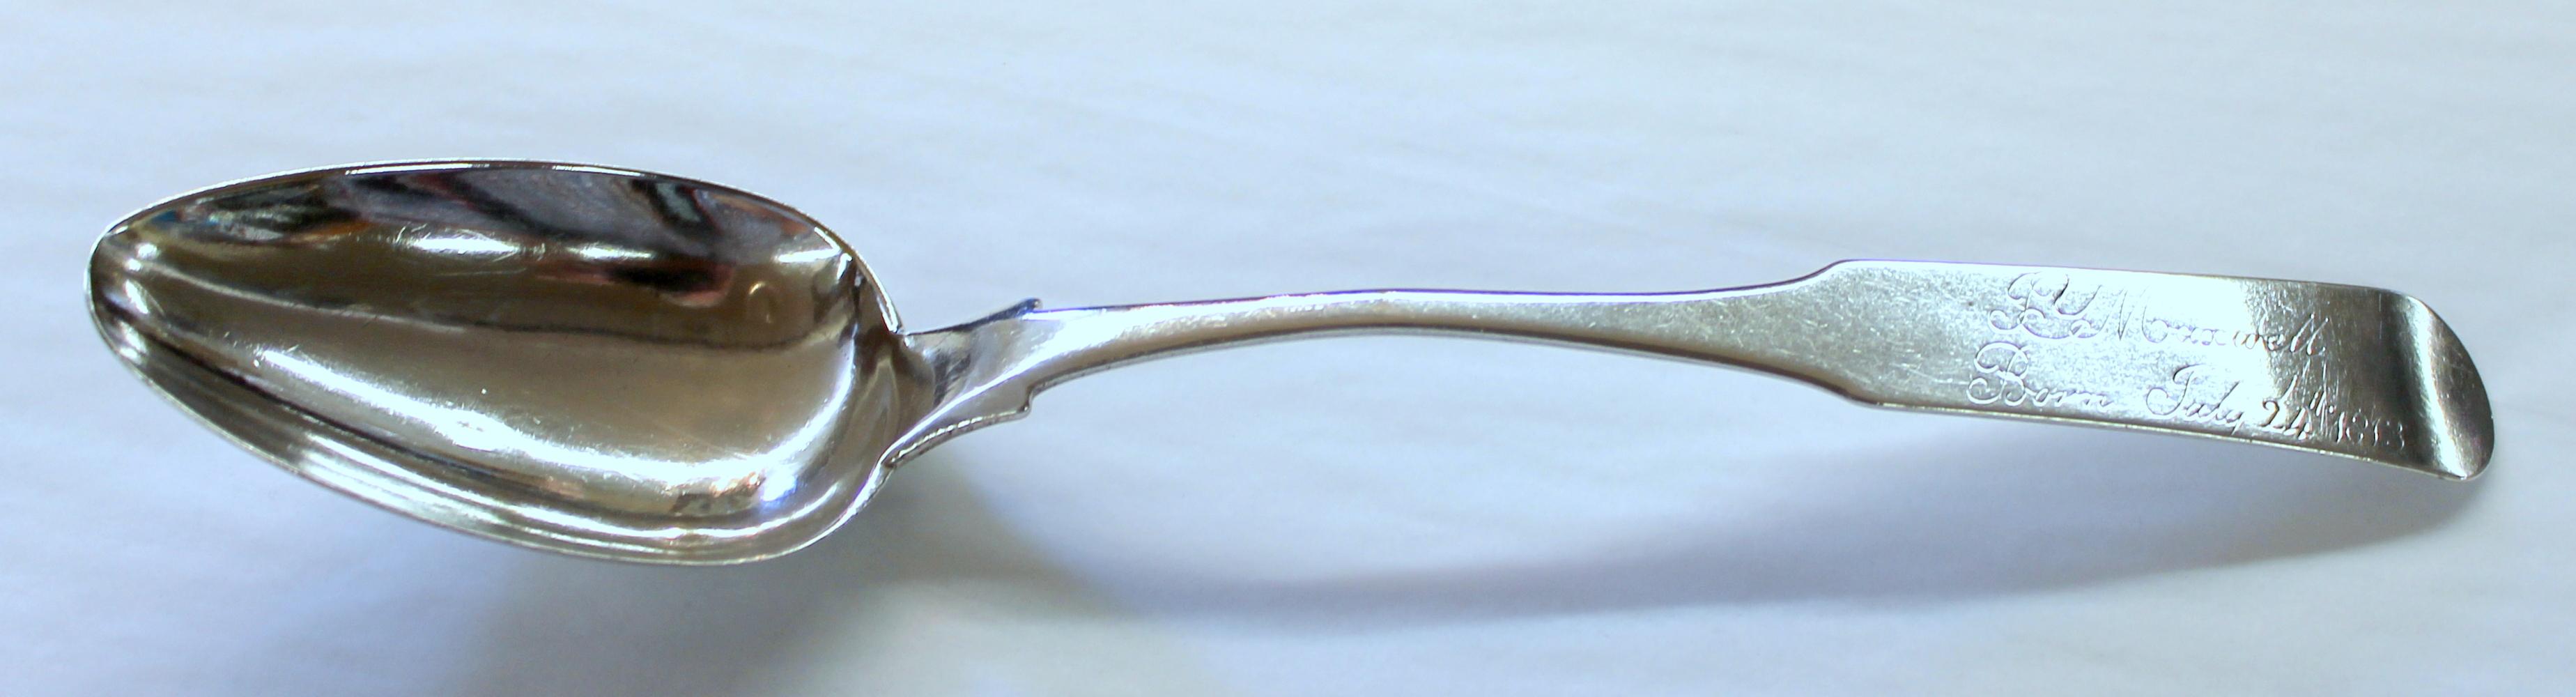 Fine and rare antique American hand engraved coin silver presentation birth spoon, fiddle pattern, with maker's marks by silversmith: Eleazer Wyer, Jr. (Portland, ME).

Maker's Marks: Eleazer Wyer, Jr. (Portland, ME), working 1806-1813
Approx. 2.5